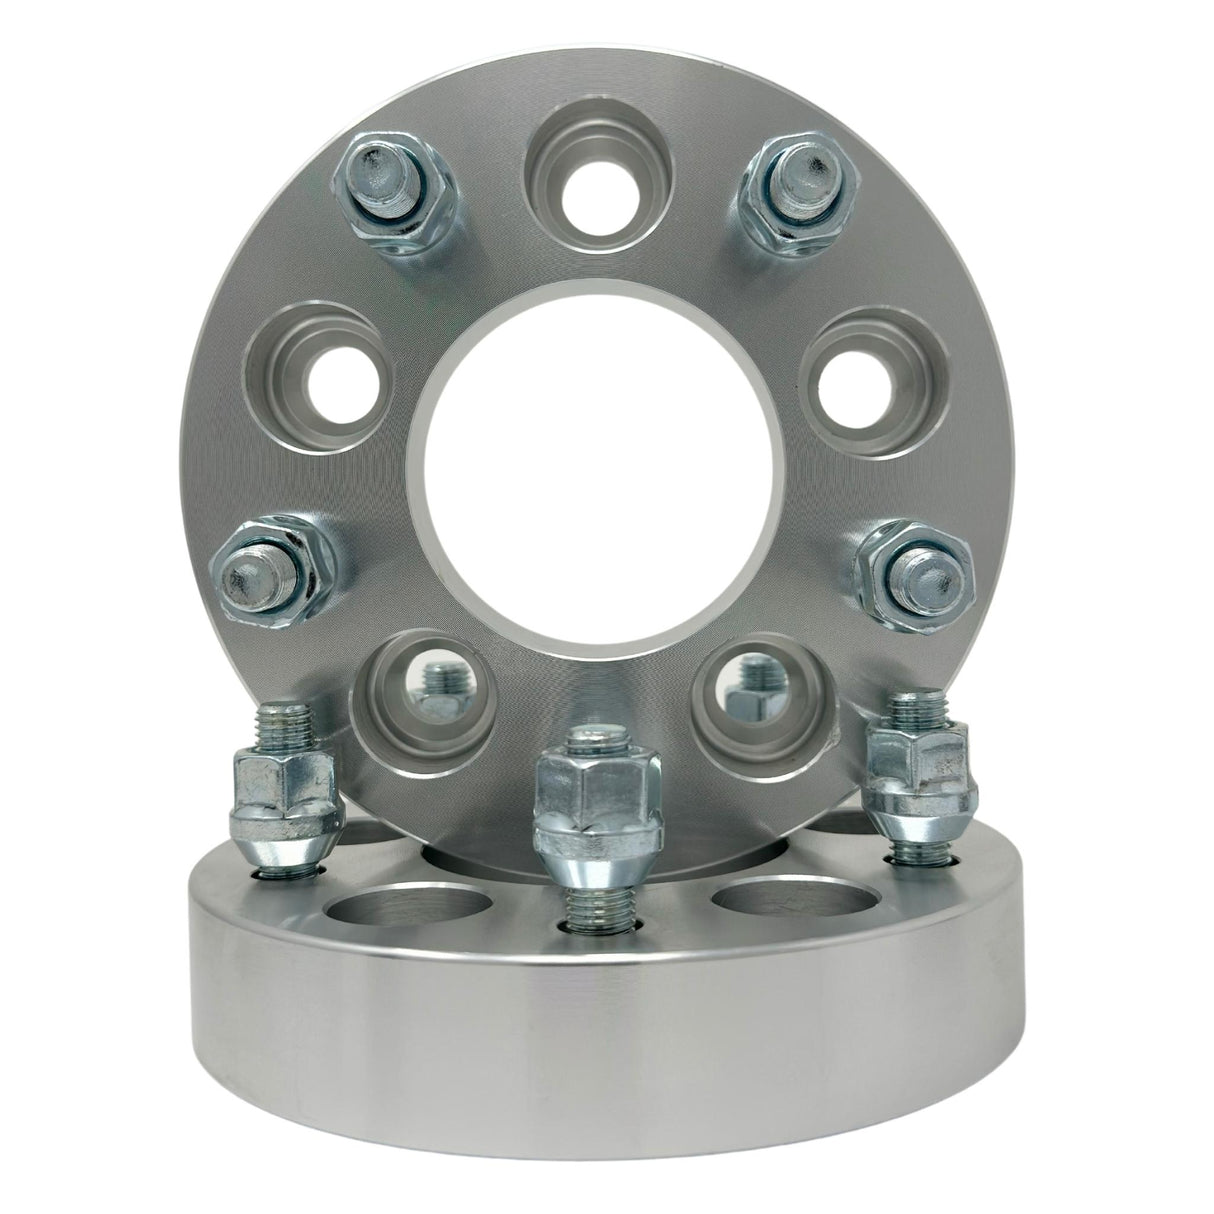 5x110 to 5x114.3 Wheel Adapters 1" Inch (25mm) 12x1.5 Studs & Lug Nuts 65.1mm Center Bore | 5x110 to 5x4.5